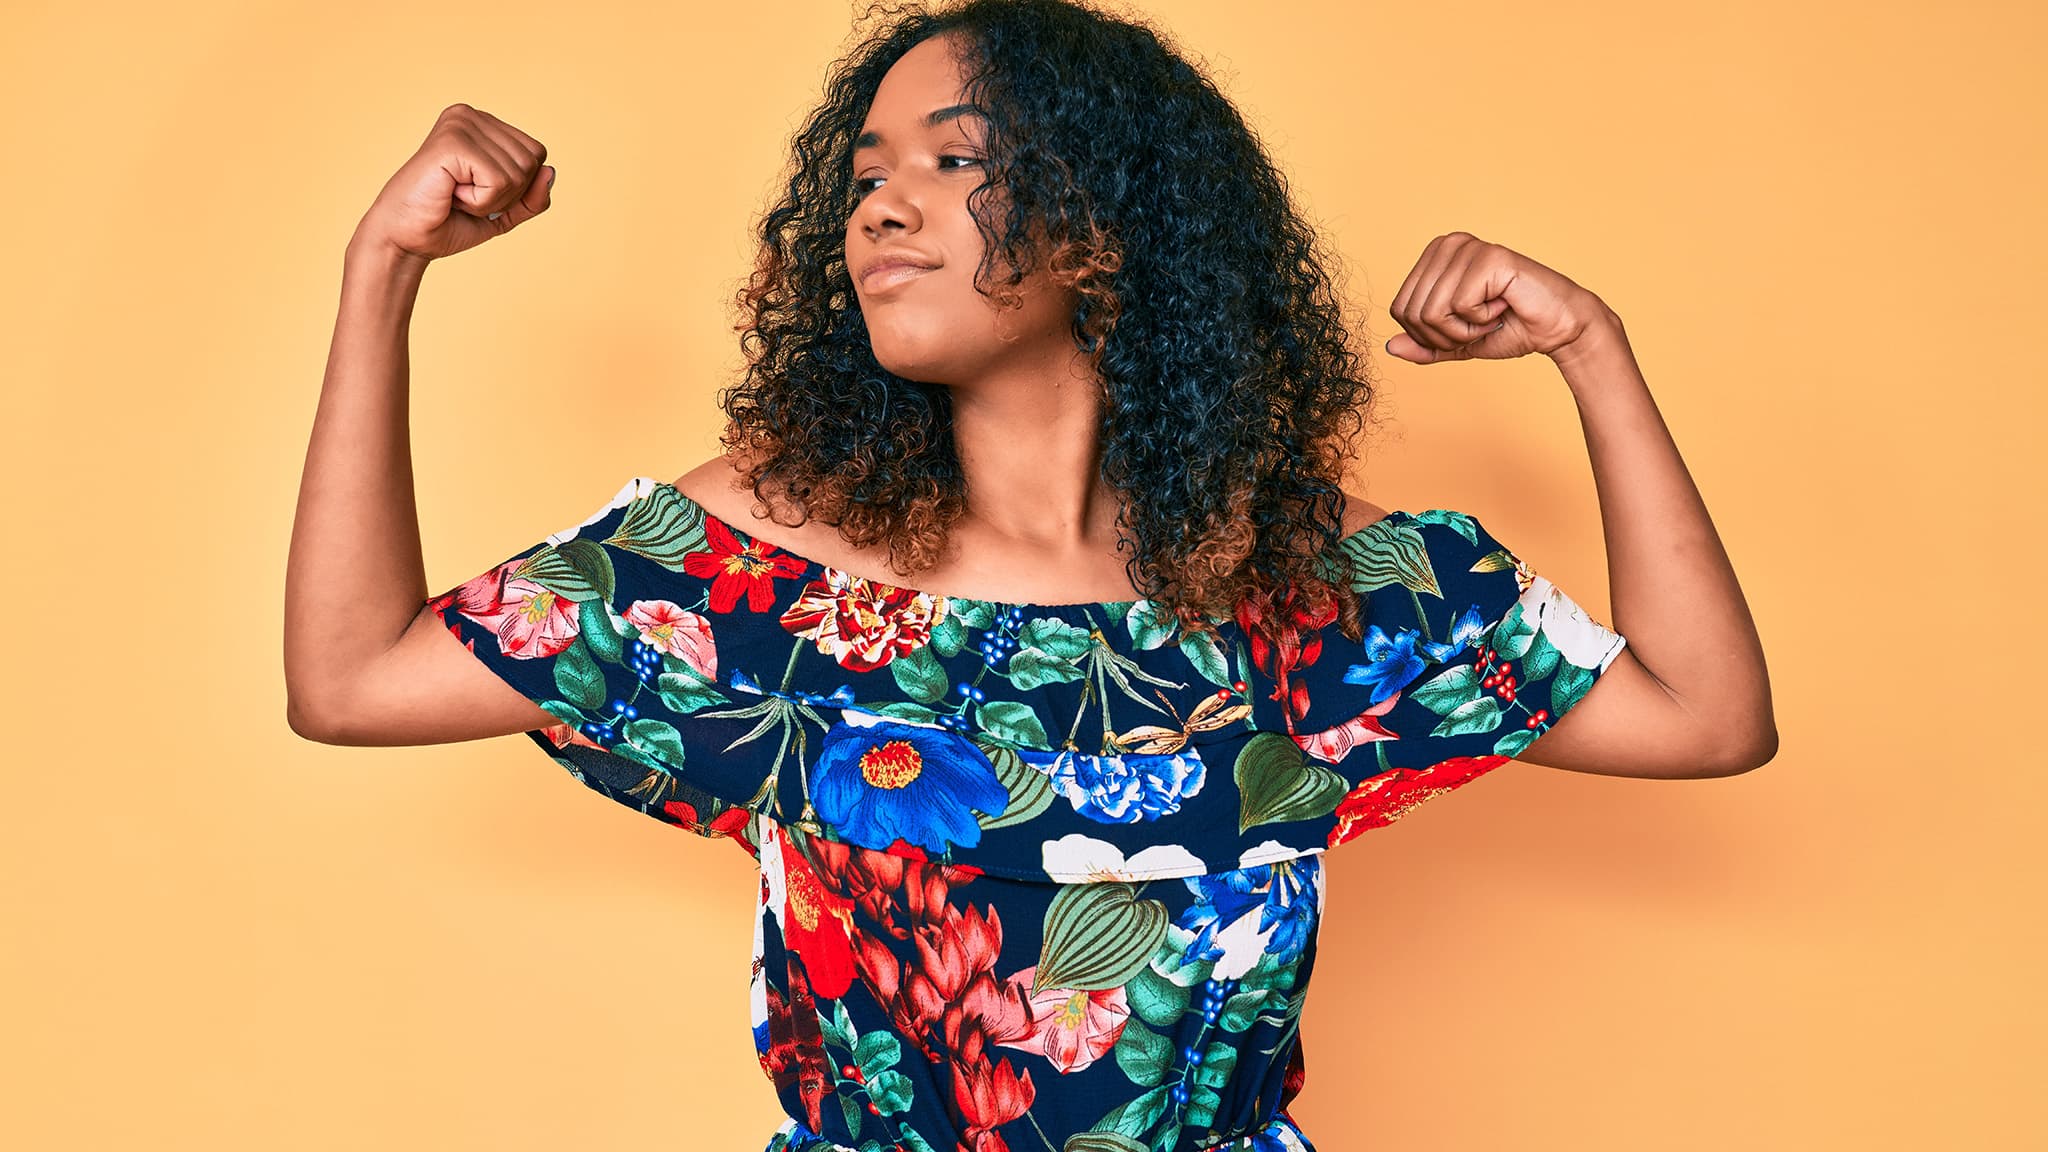 Photo Of Black Woman Flexing Her Arms Looking To Her Right, Feeling Strong